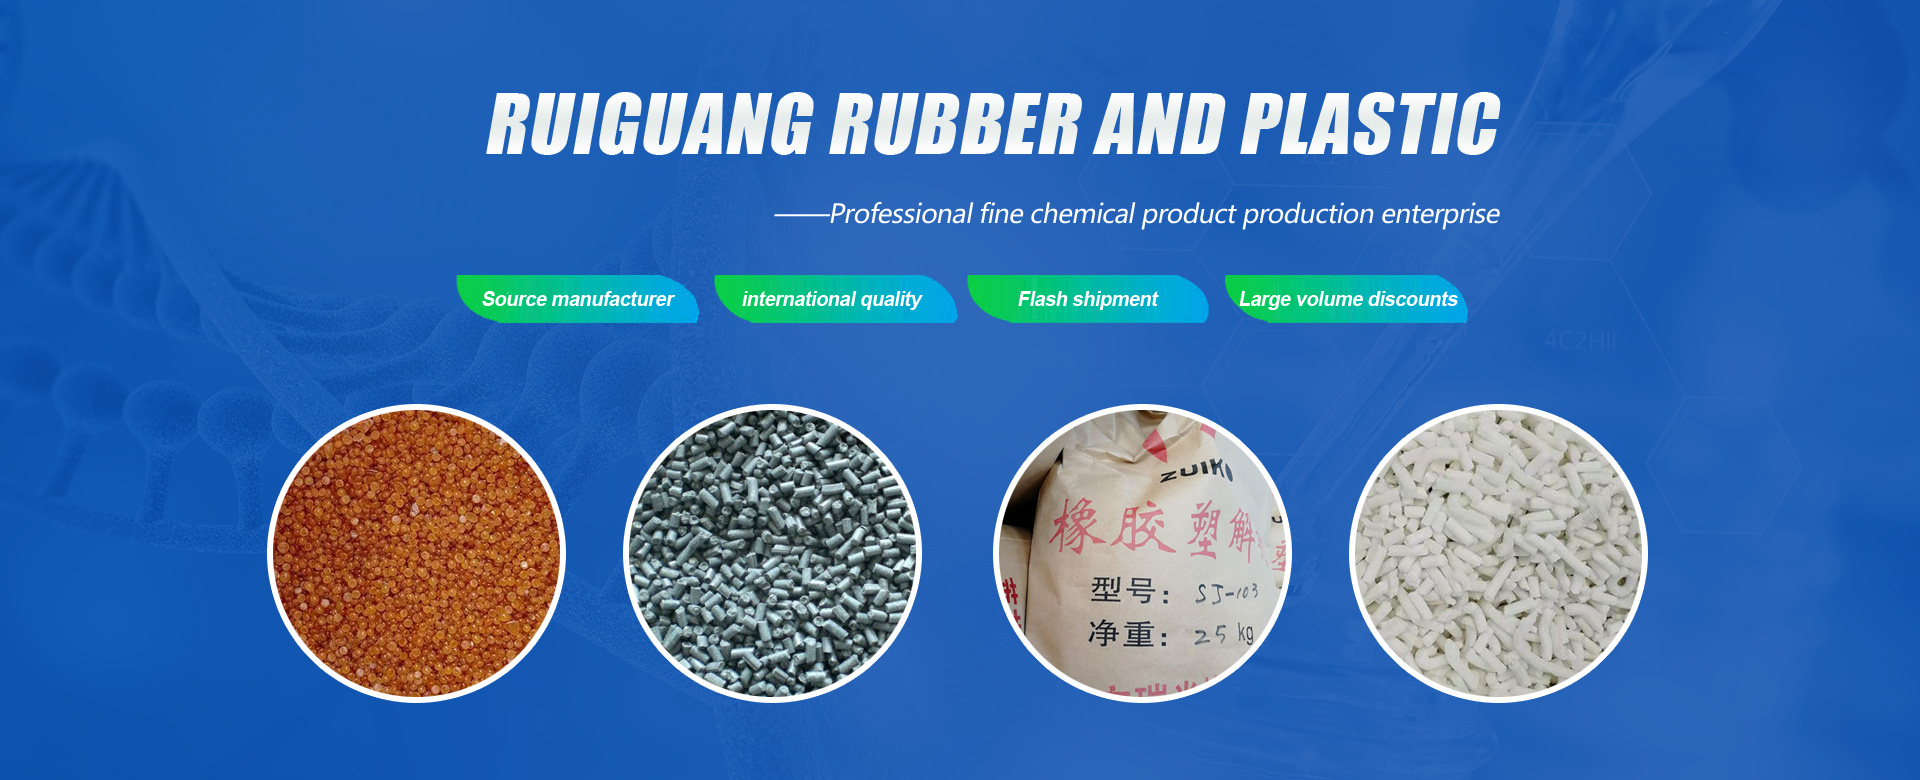 Laiwu Ruiguang Rubber and Plastic Additive Factory